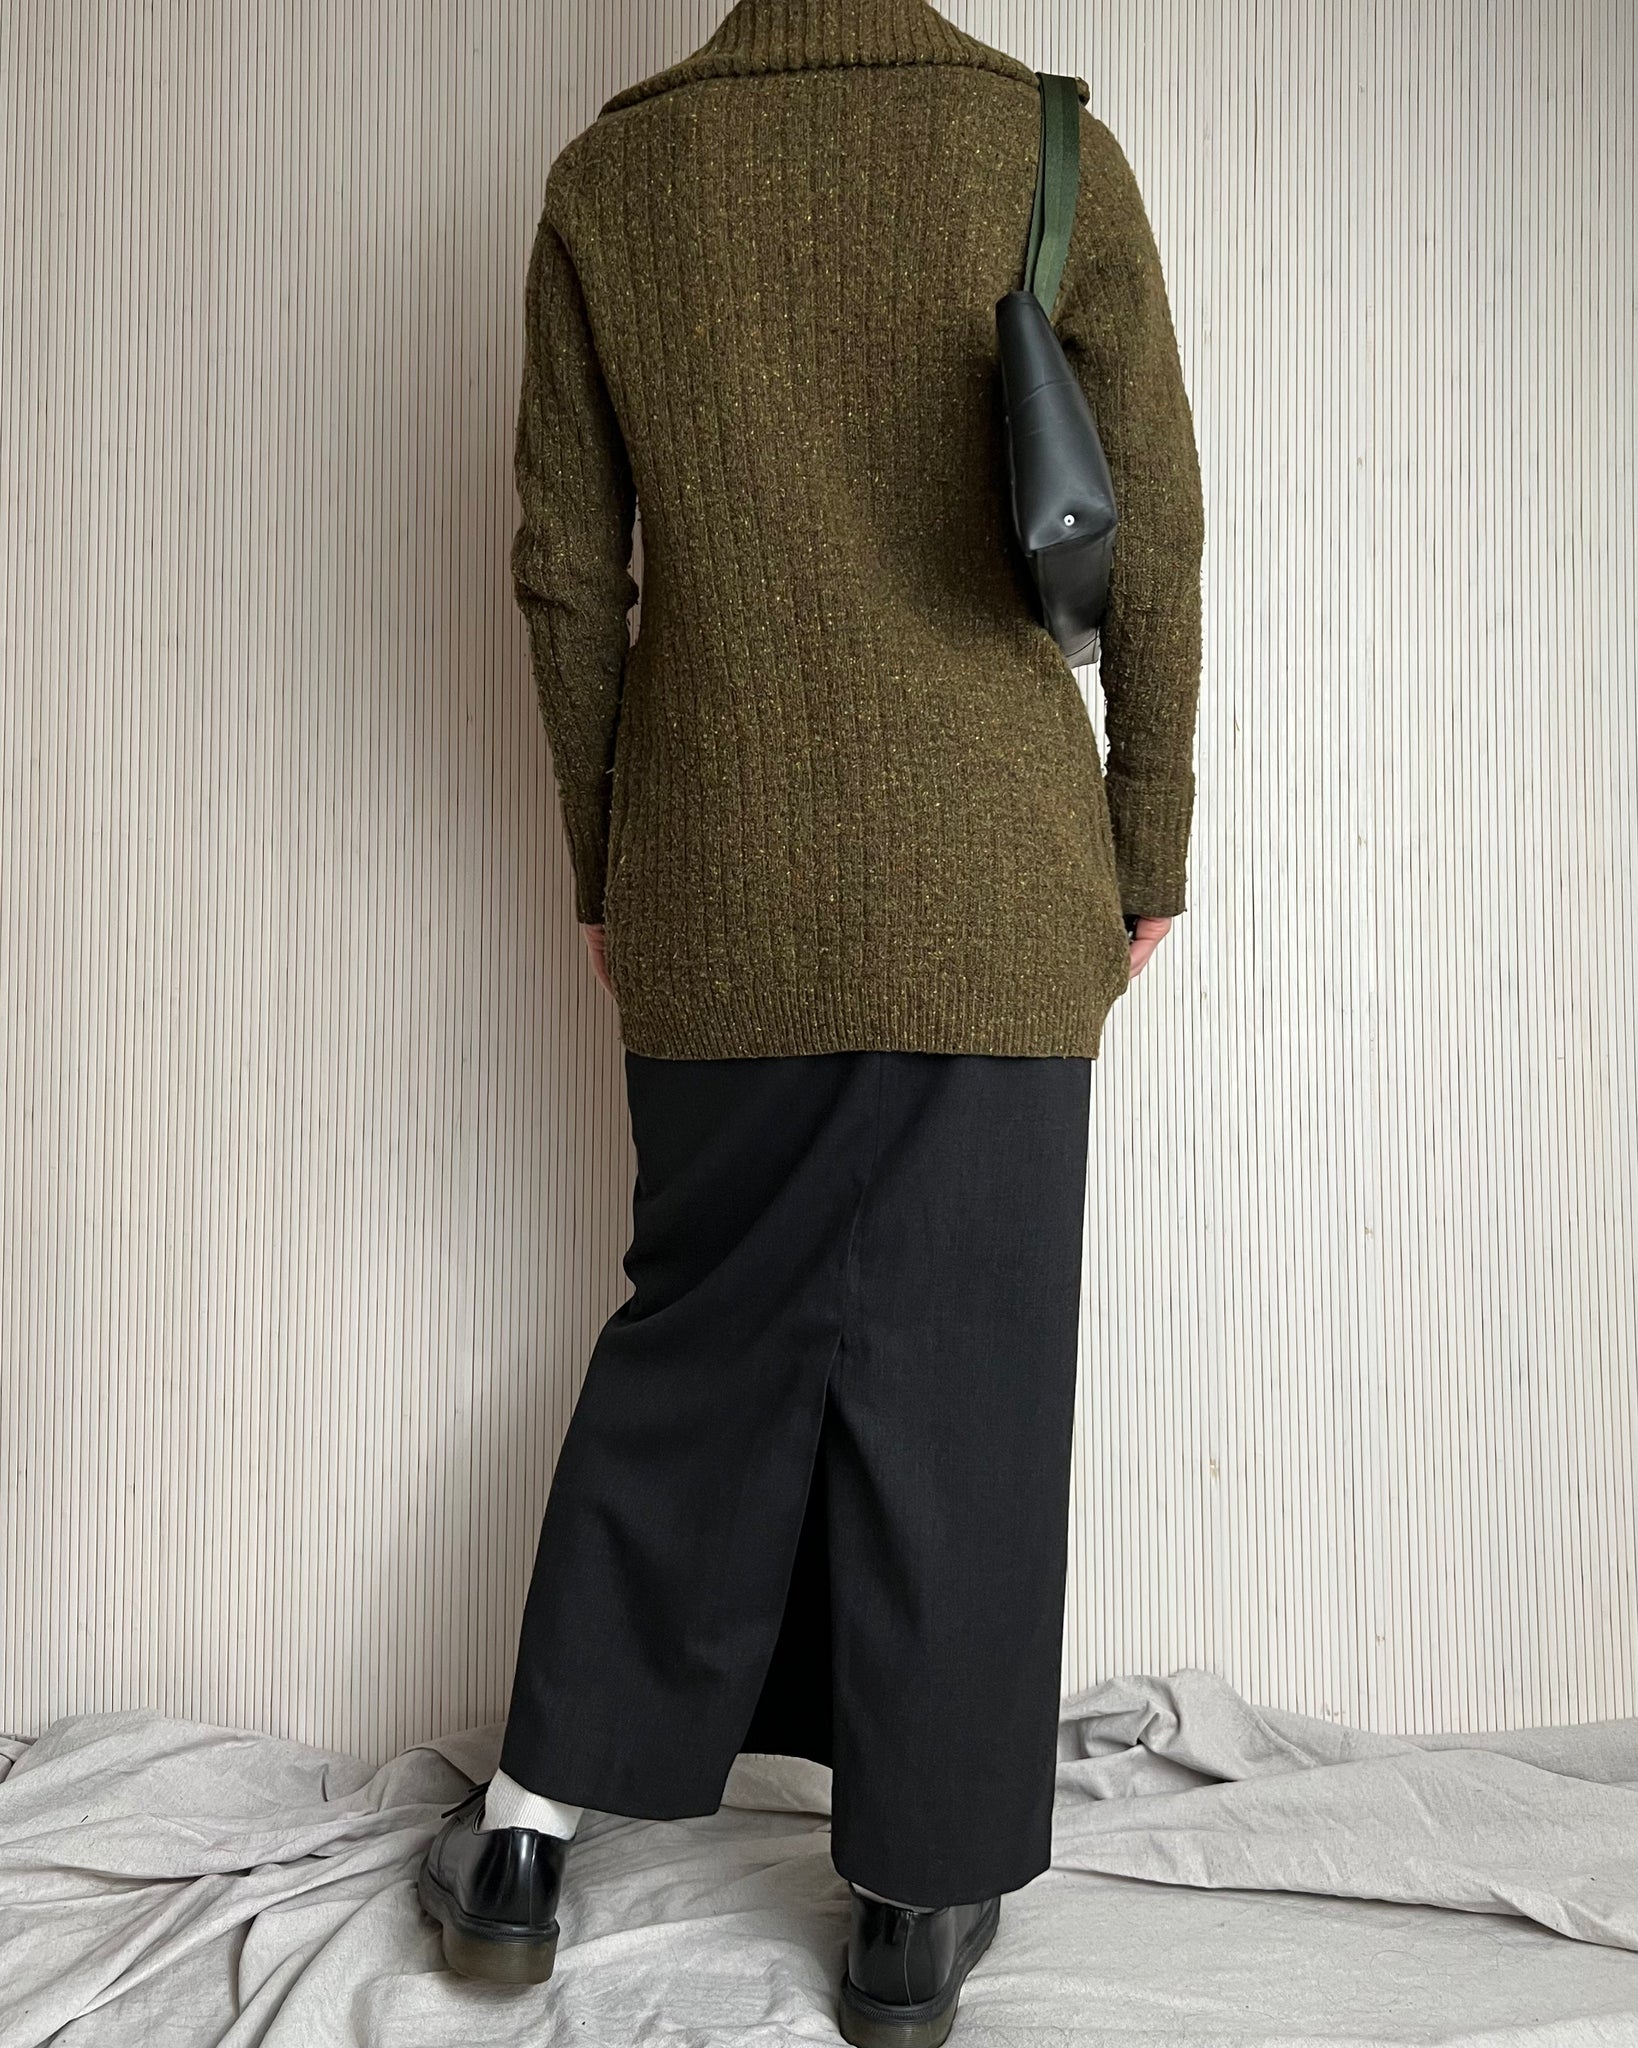 NSF Olive Lambswool Cardigan (Firs S)